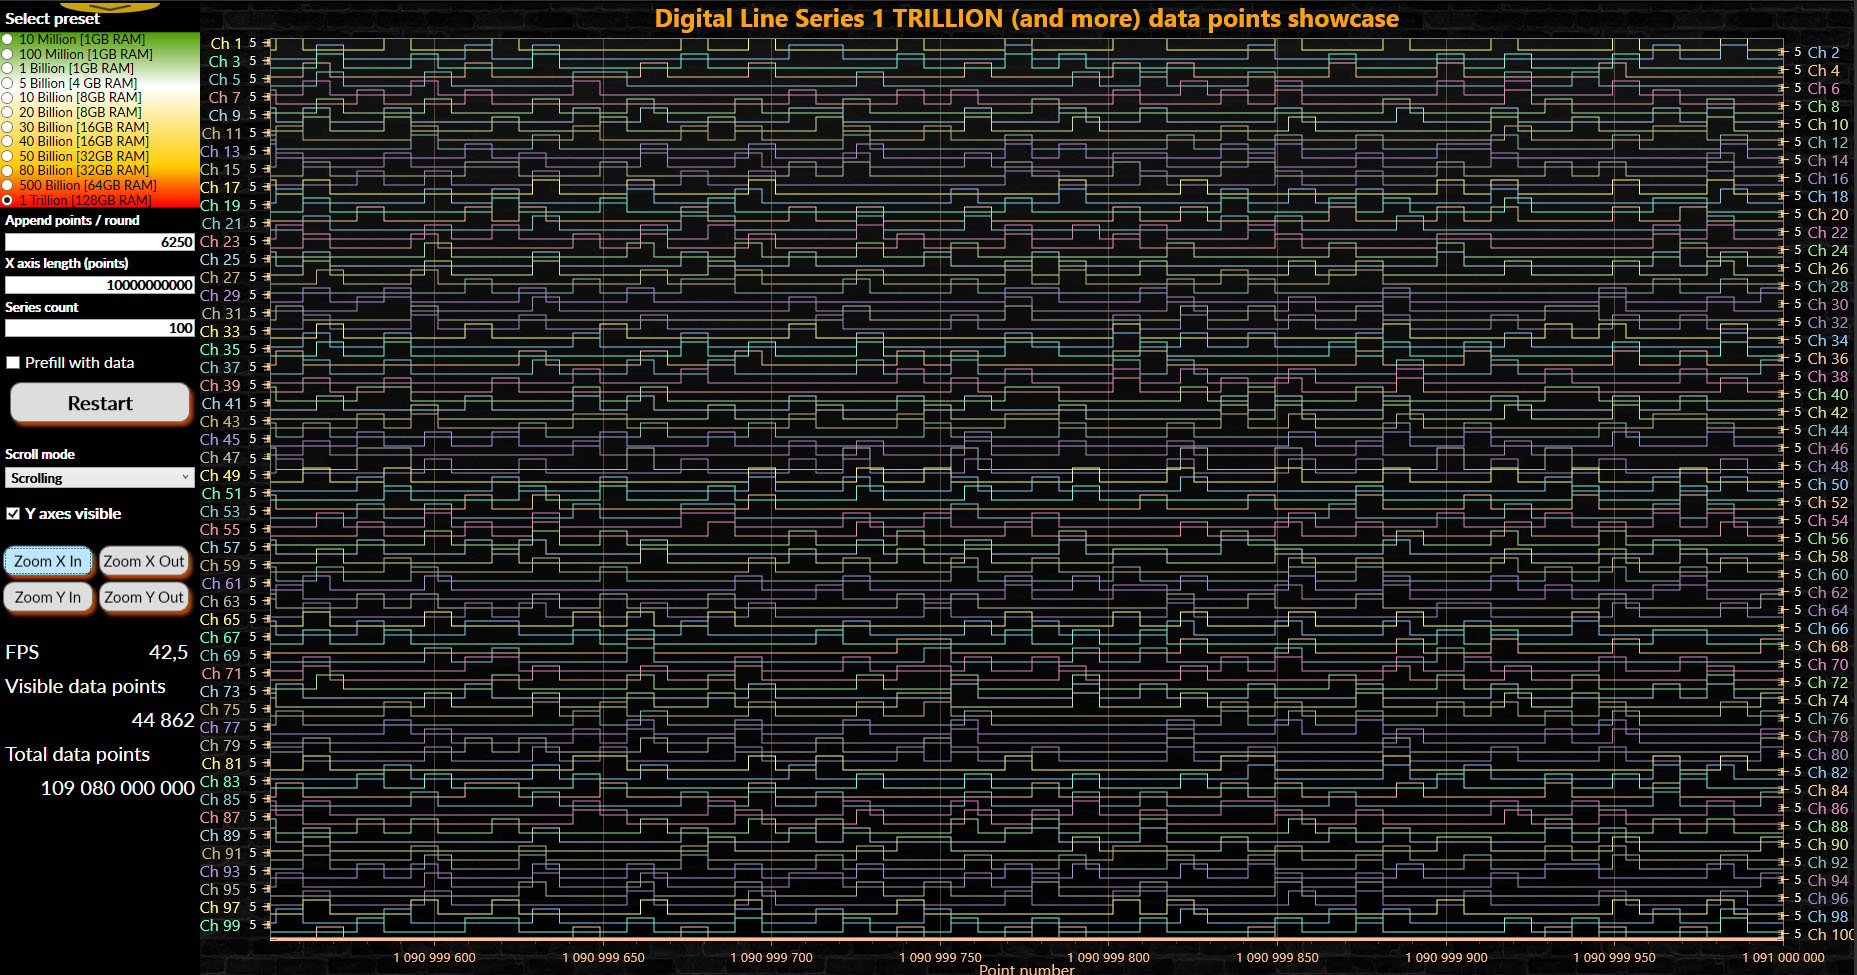 Visualizing One Trillion Data Points in Real-Time